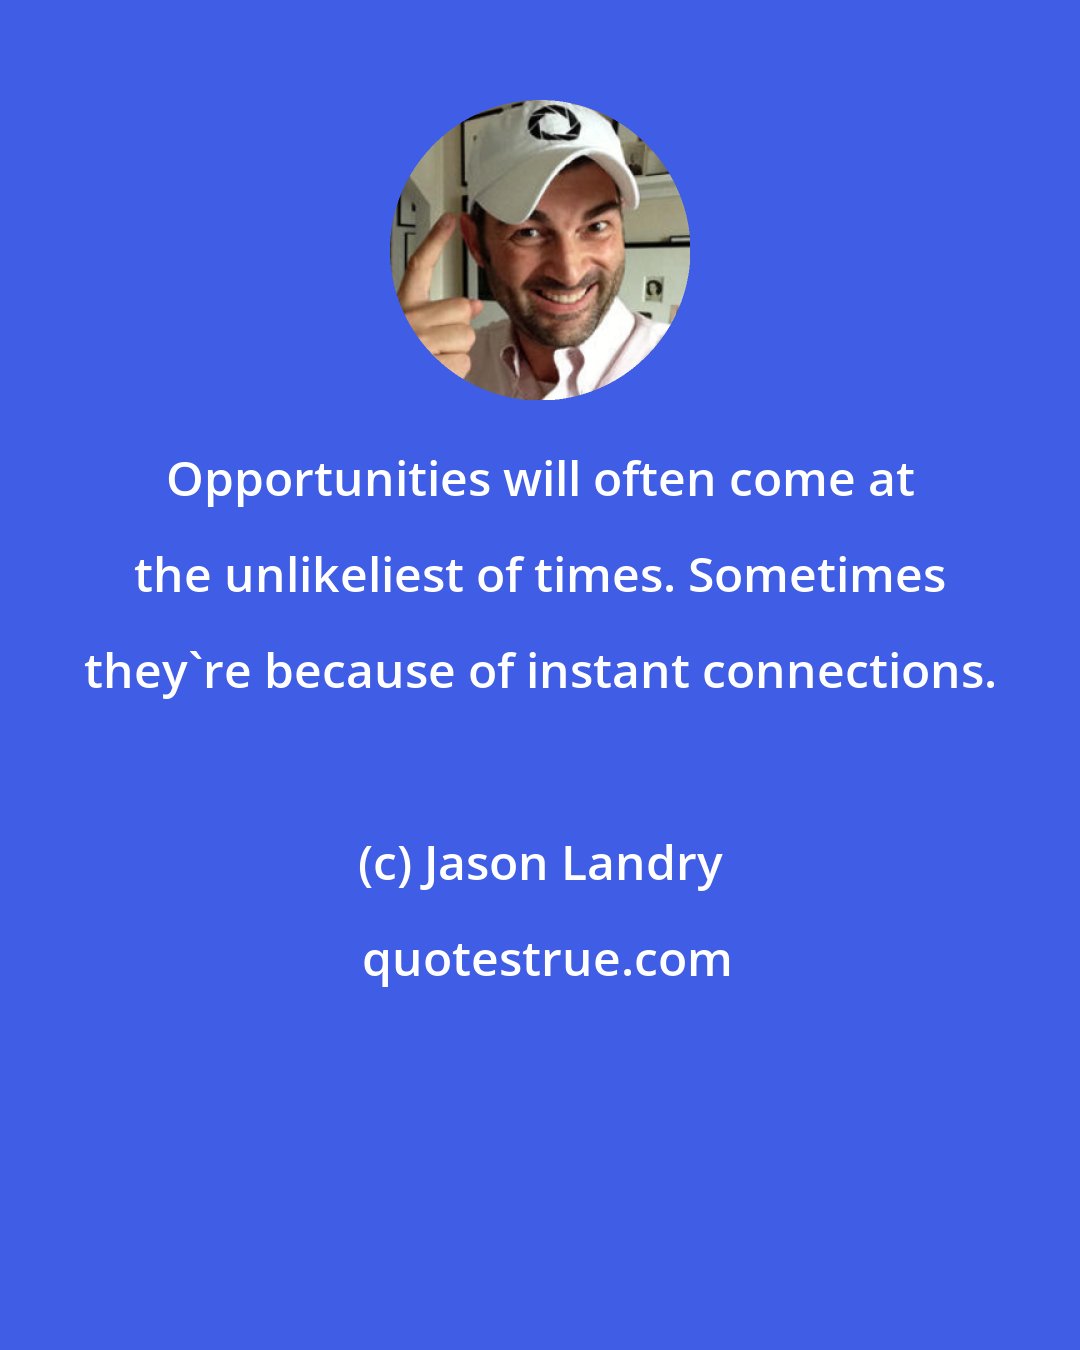 Jason Landry: Opportunities will often come at the unlikeliest of times. Sometimes they're because of instant connections.